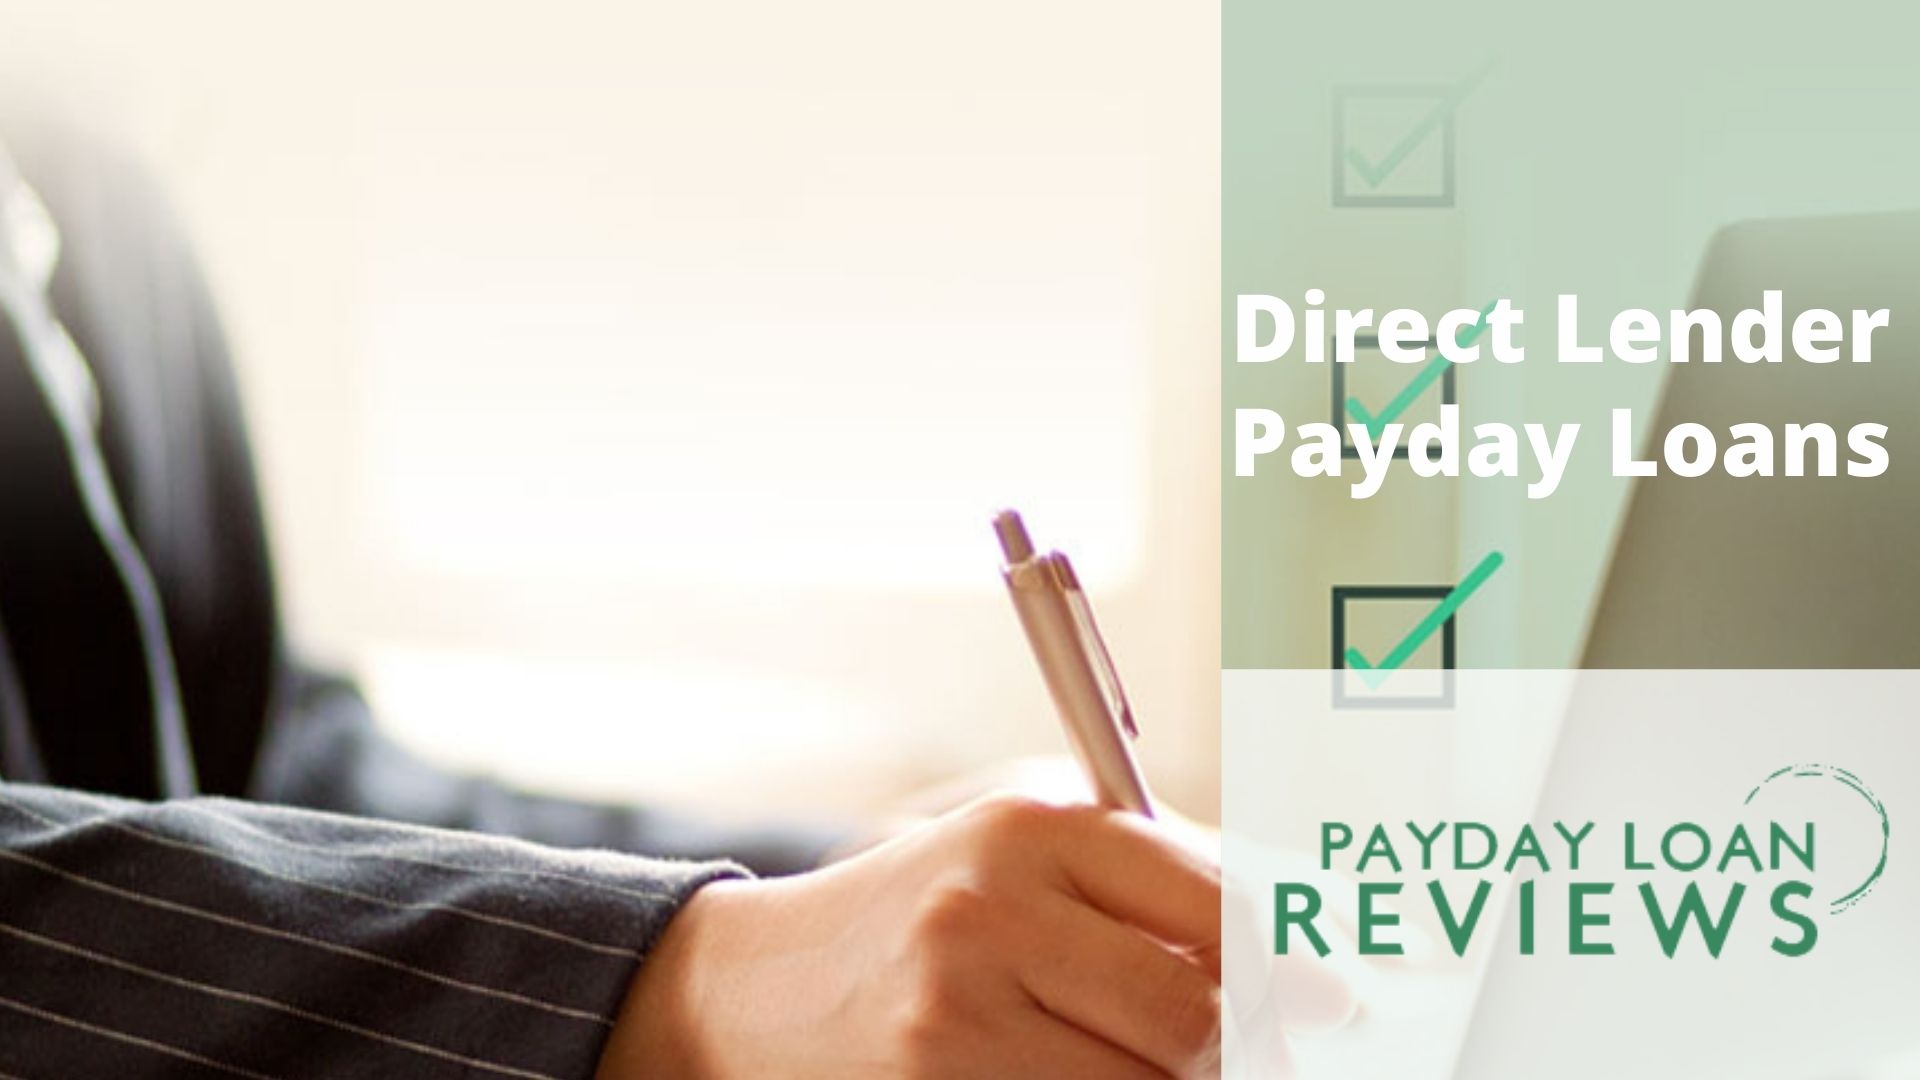 How Can I Get A Payday Loan From A Direct Lender?